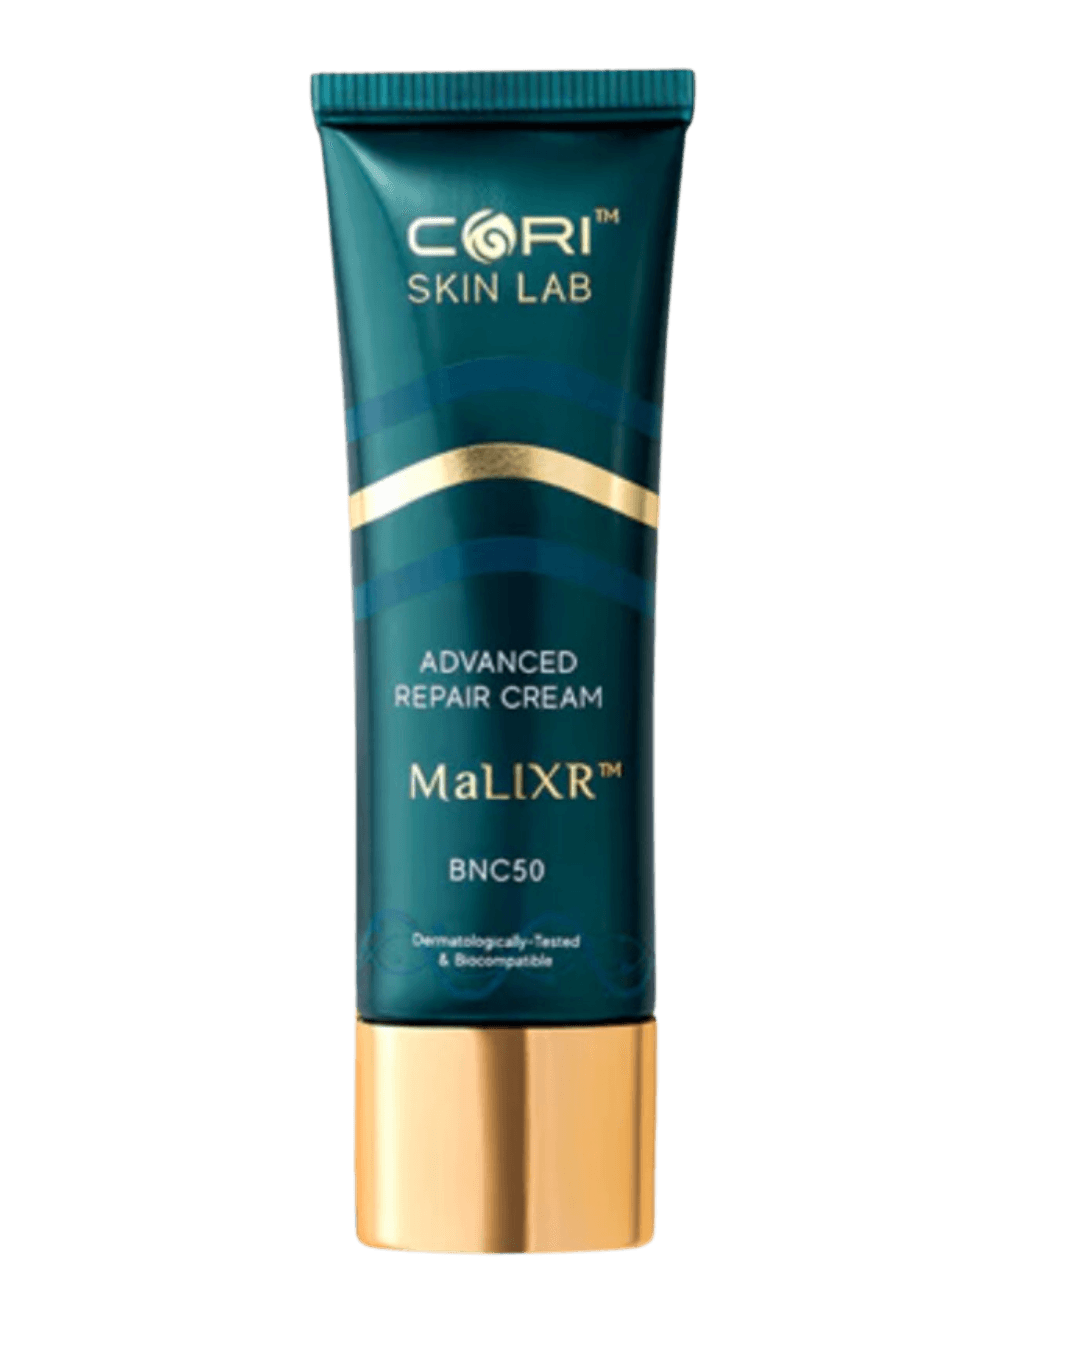 Daily Vanity Beauty Awards 2024 Best Skincare CORI SKIN LAB Advanced Repair Cream with MaLIXR Biotechnology Voted By Beauty Experts